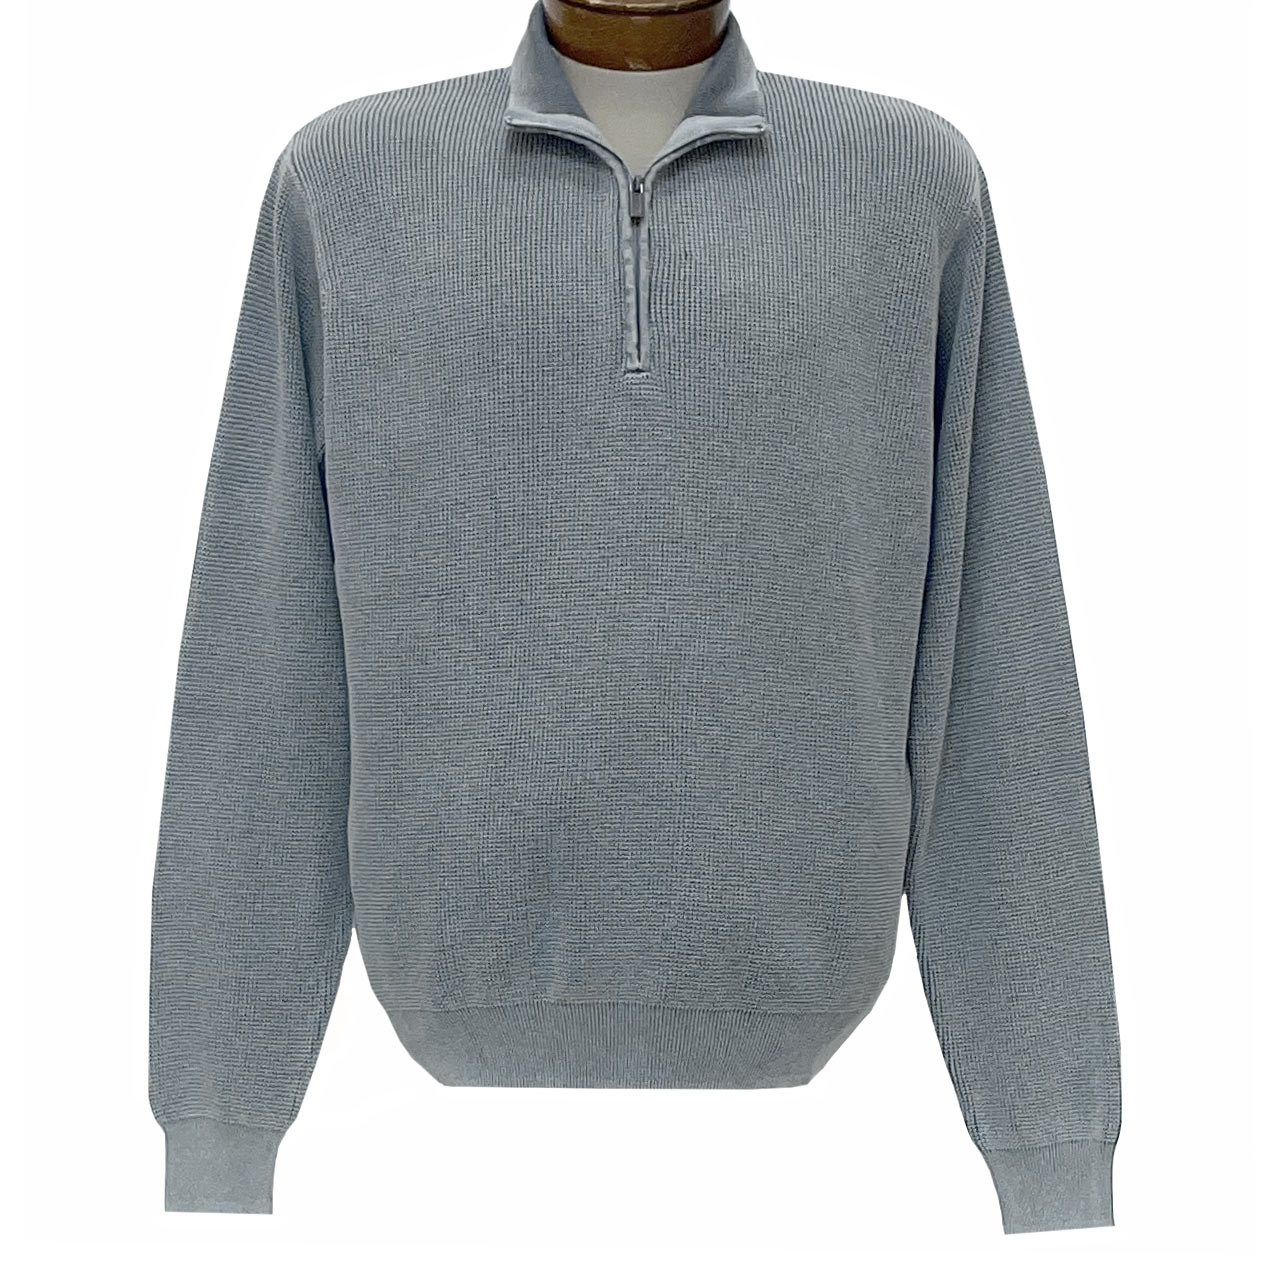 Men's F/X Fusion Sweater 100% Cotton Baby Thermal Sand Washed 1/4 Zip Mock Neck #806 Grey